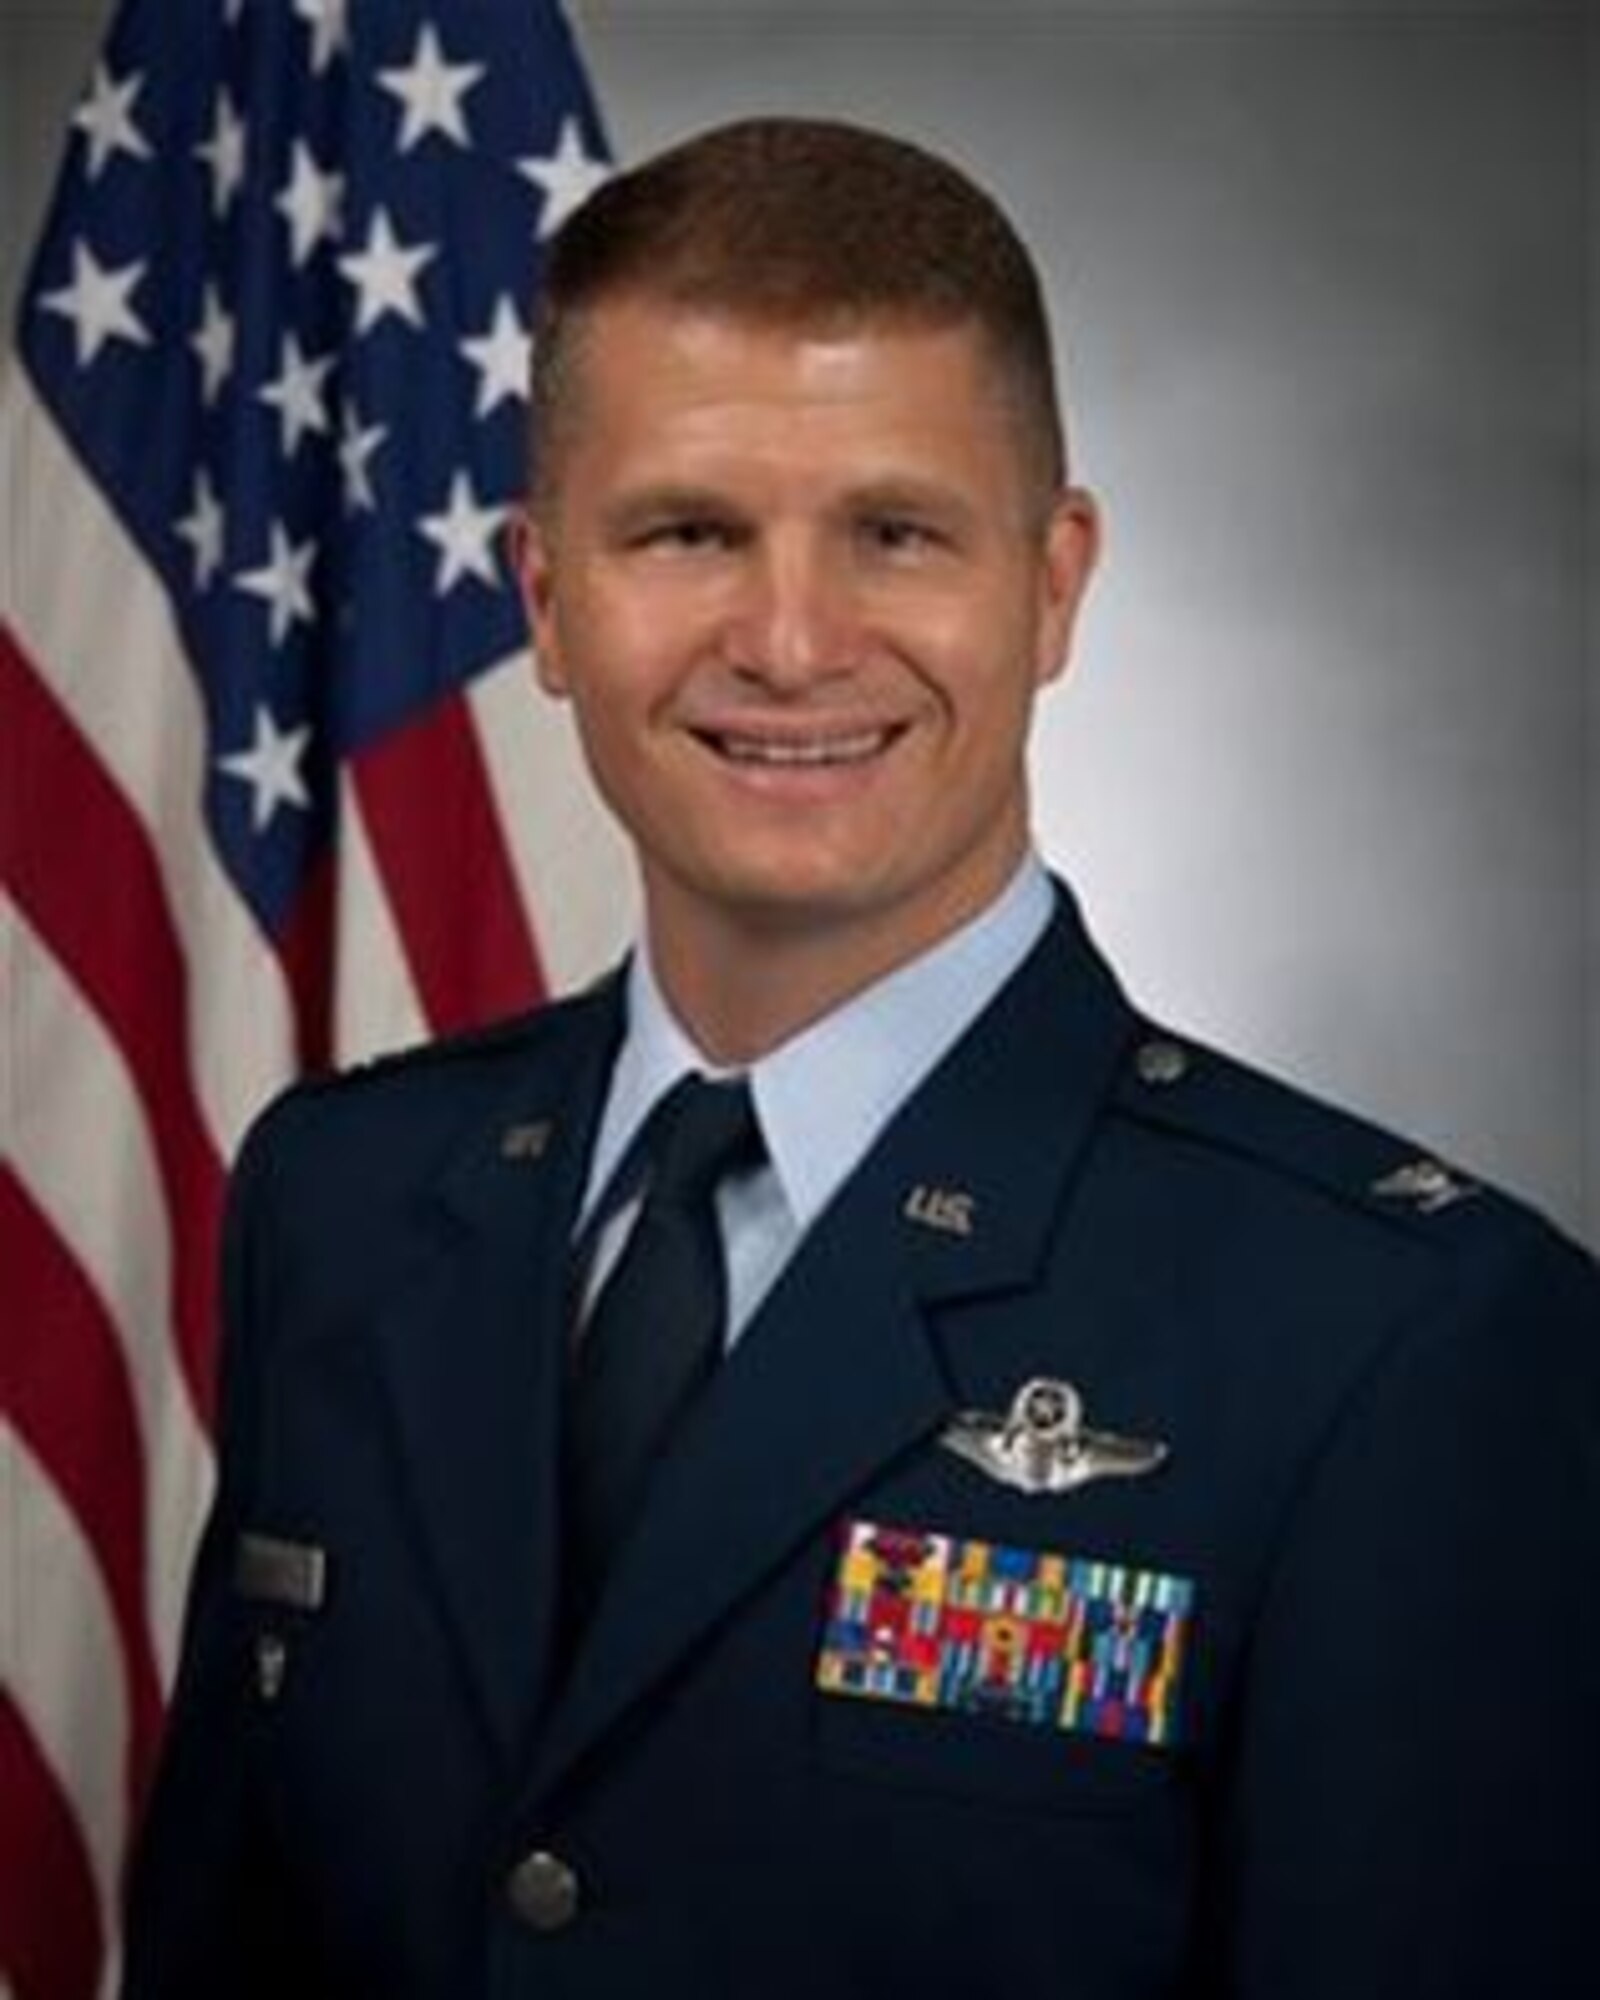 Commentary by Col. Corwin Pauly, 60th Air Mobility Wing Vice Commander